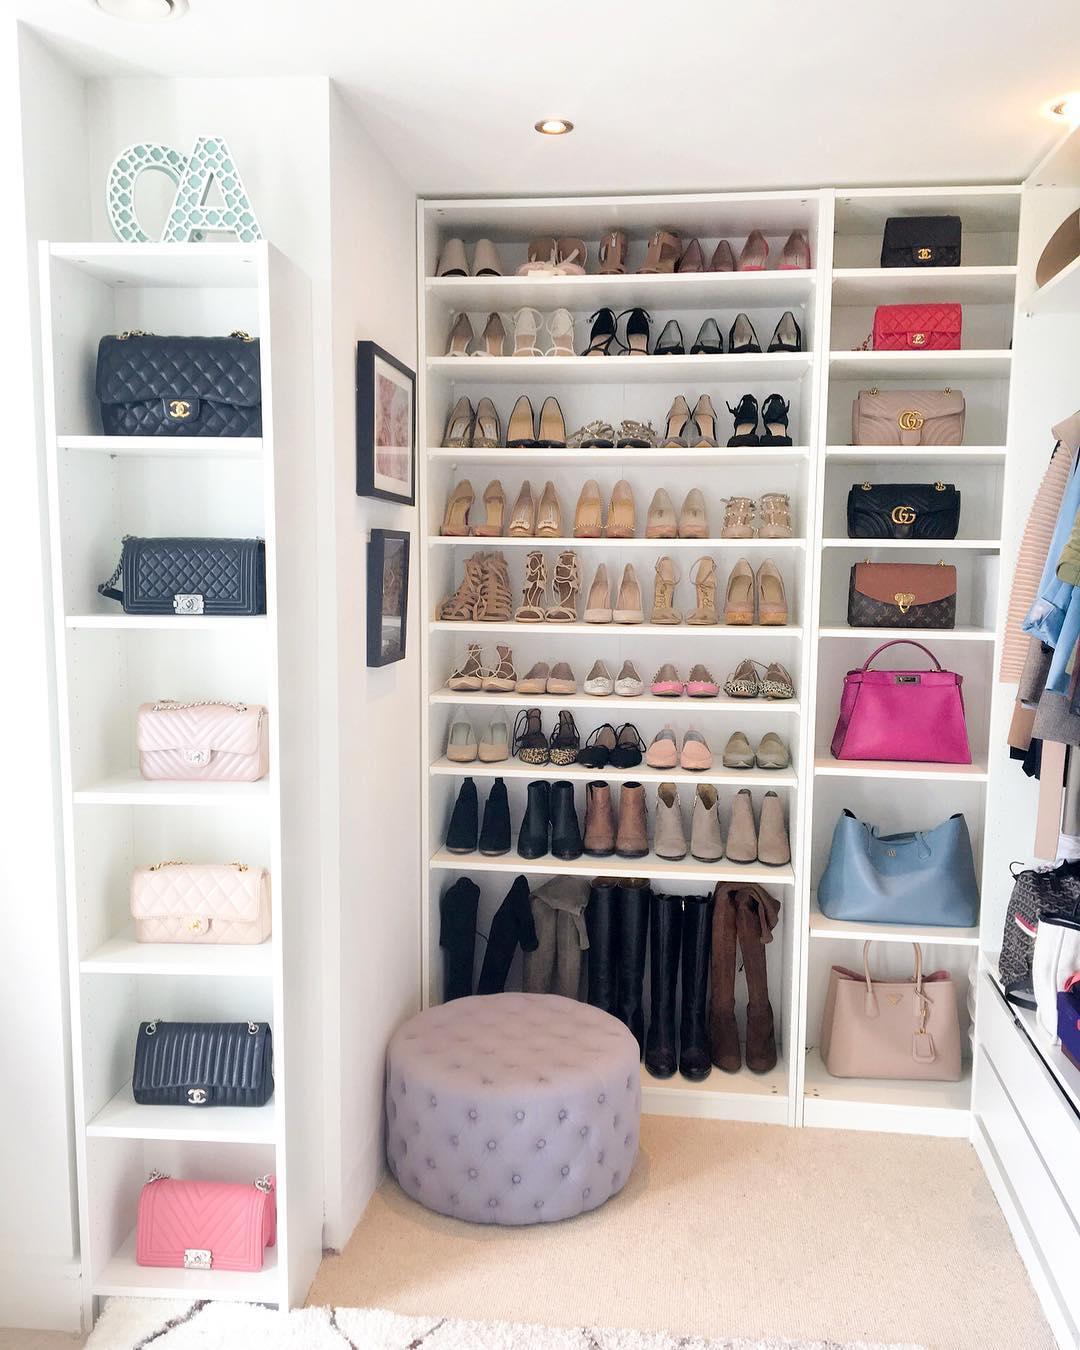 Organized, spacious walk-in closet. Photo by Instagram user @chase_amie